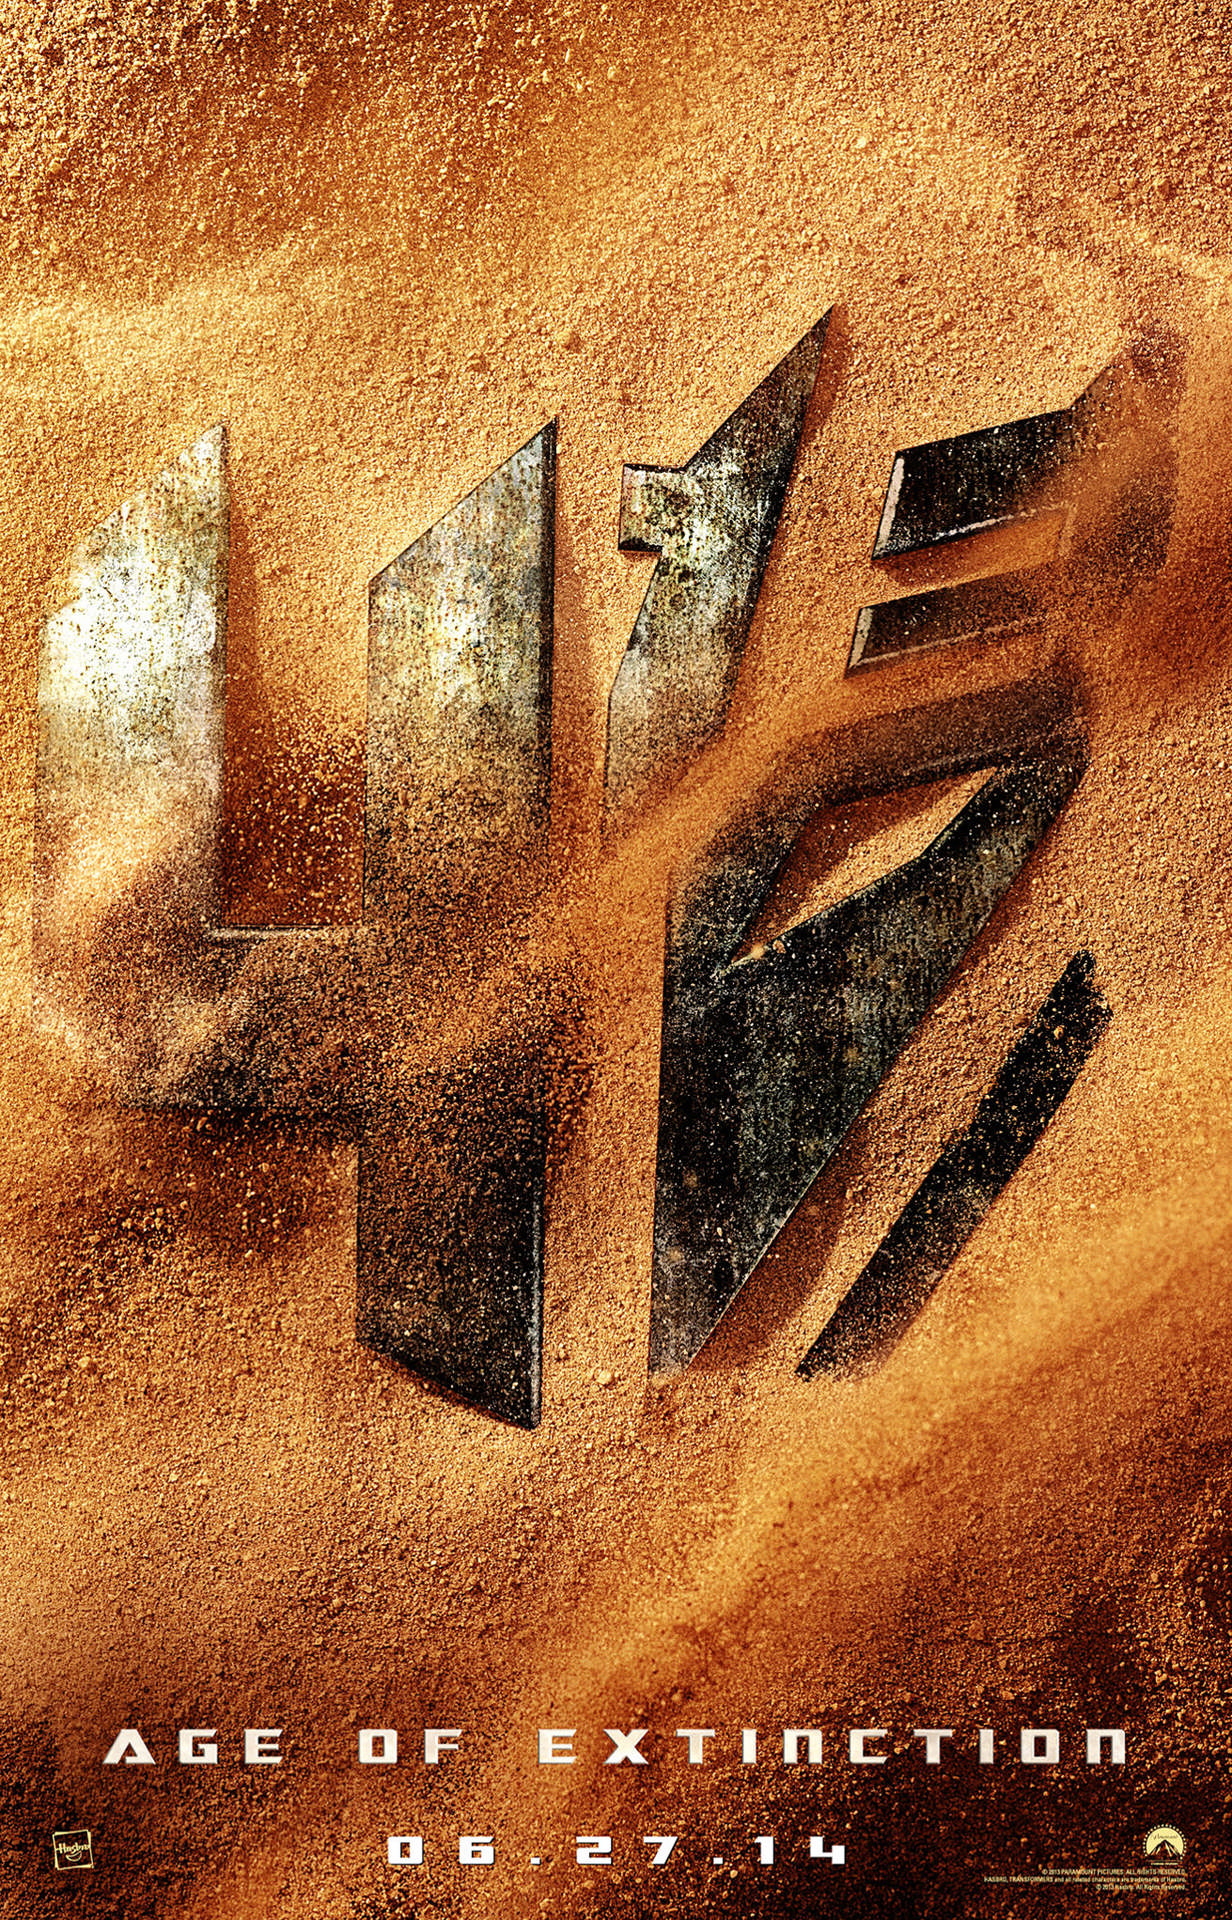 Age of extinction transformers